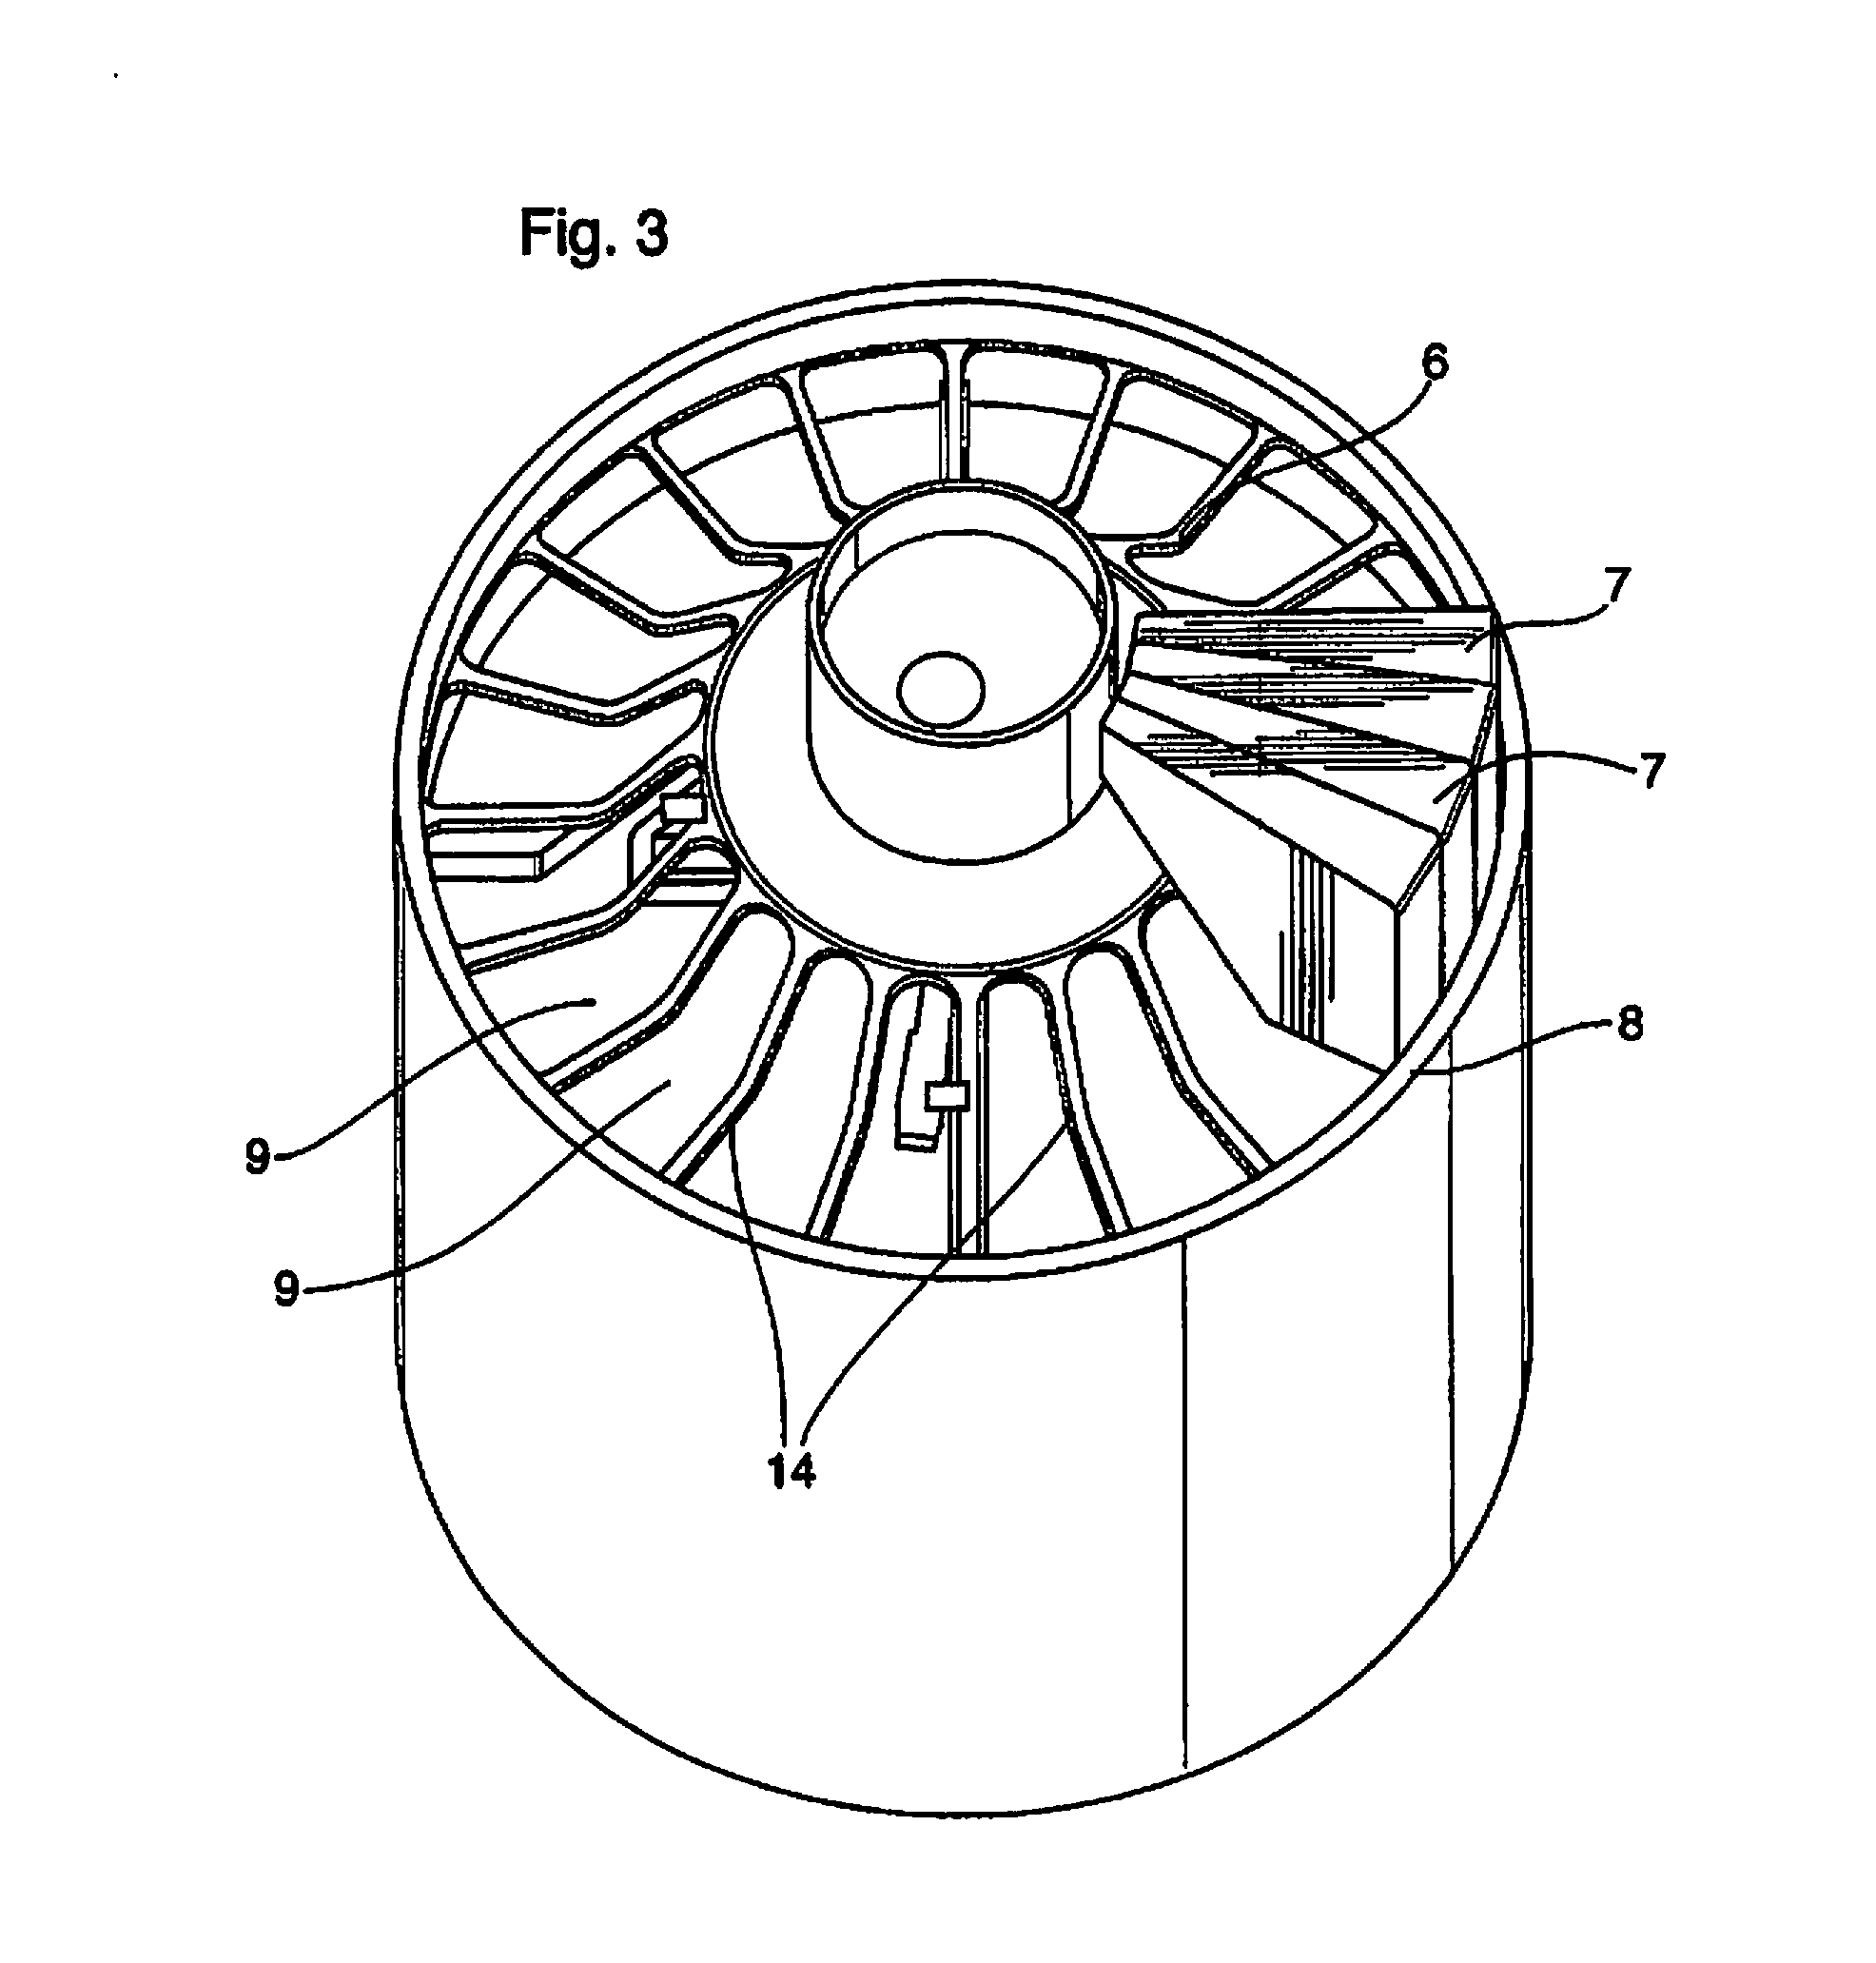 Automated dispenser and method for dispensing